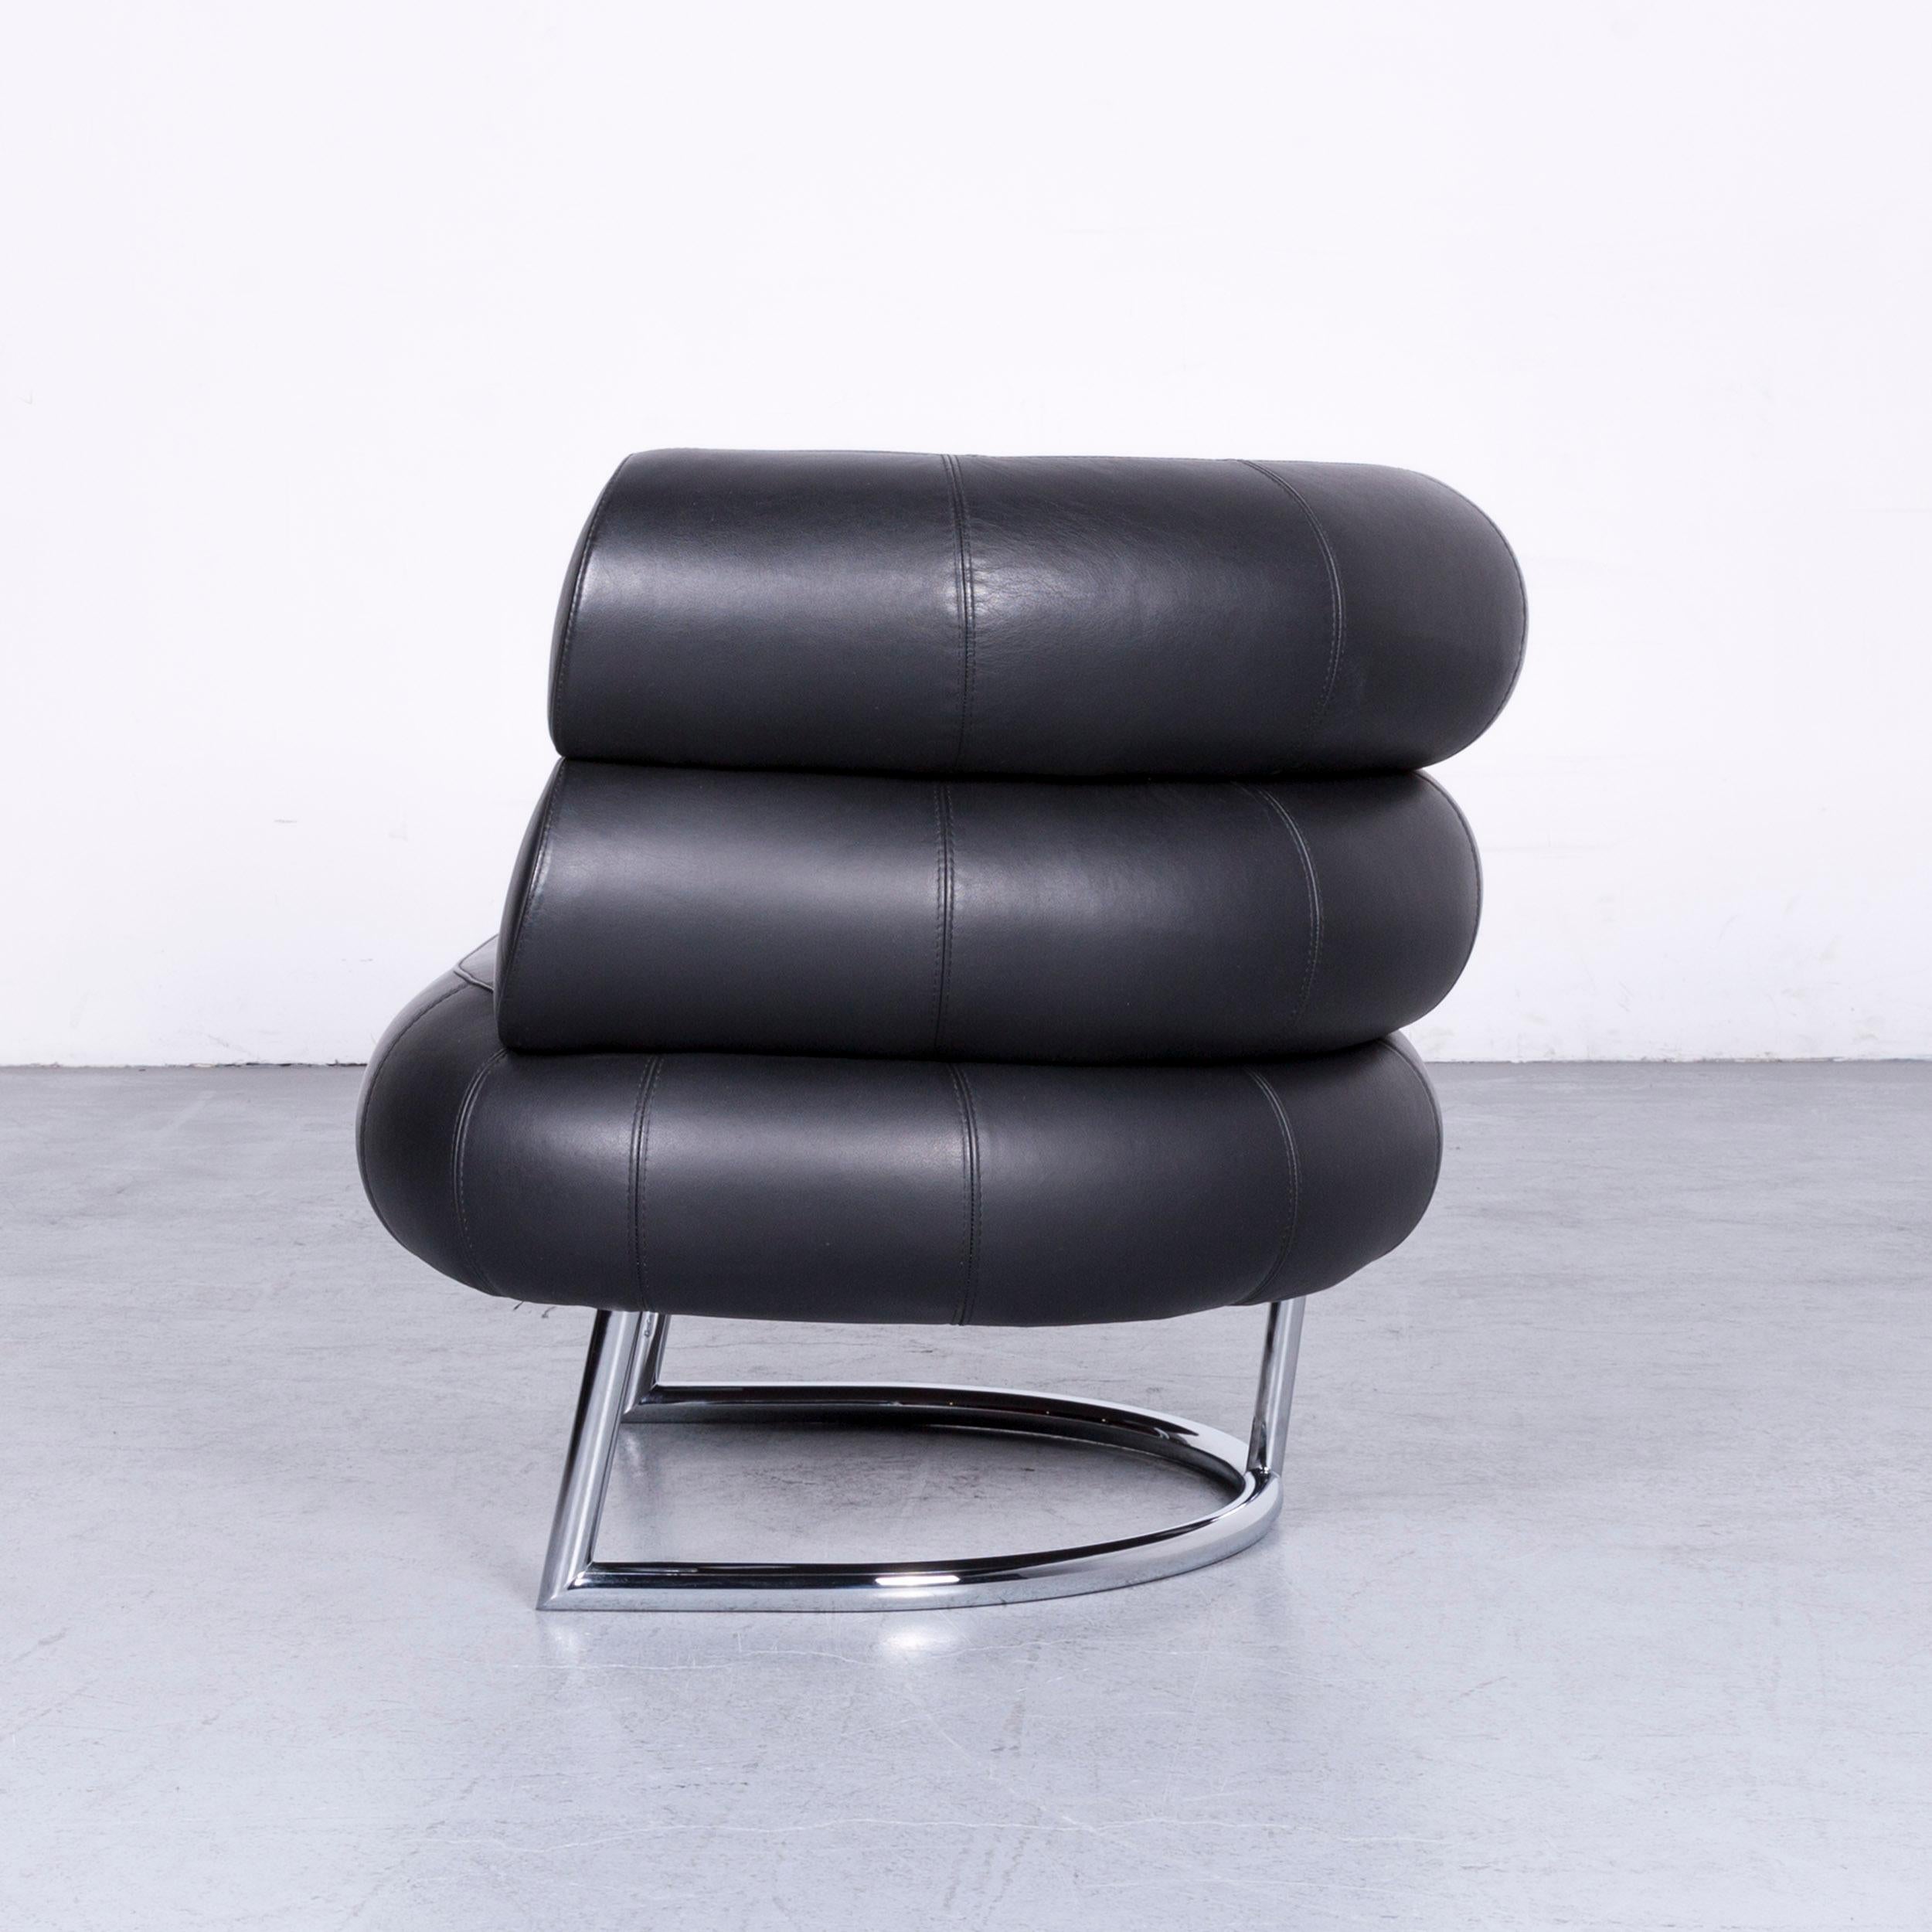 ClassiCon Bibendum Chair Designer Leather Armchair Black Genuine Leather Chair In Excellent Condition For Sale In Cologne, DE